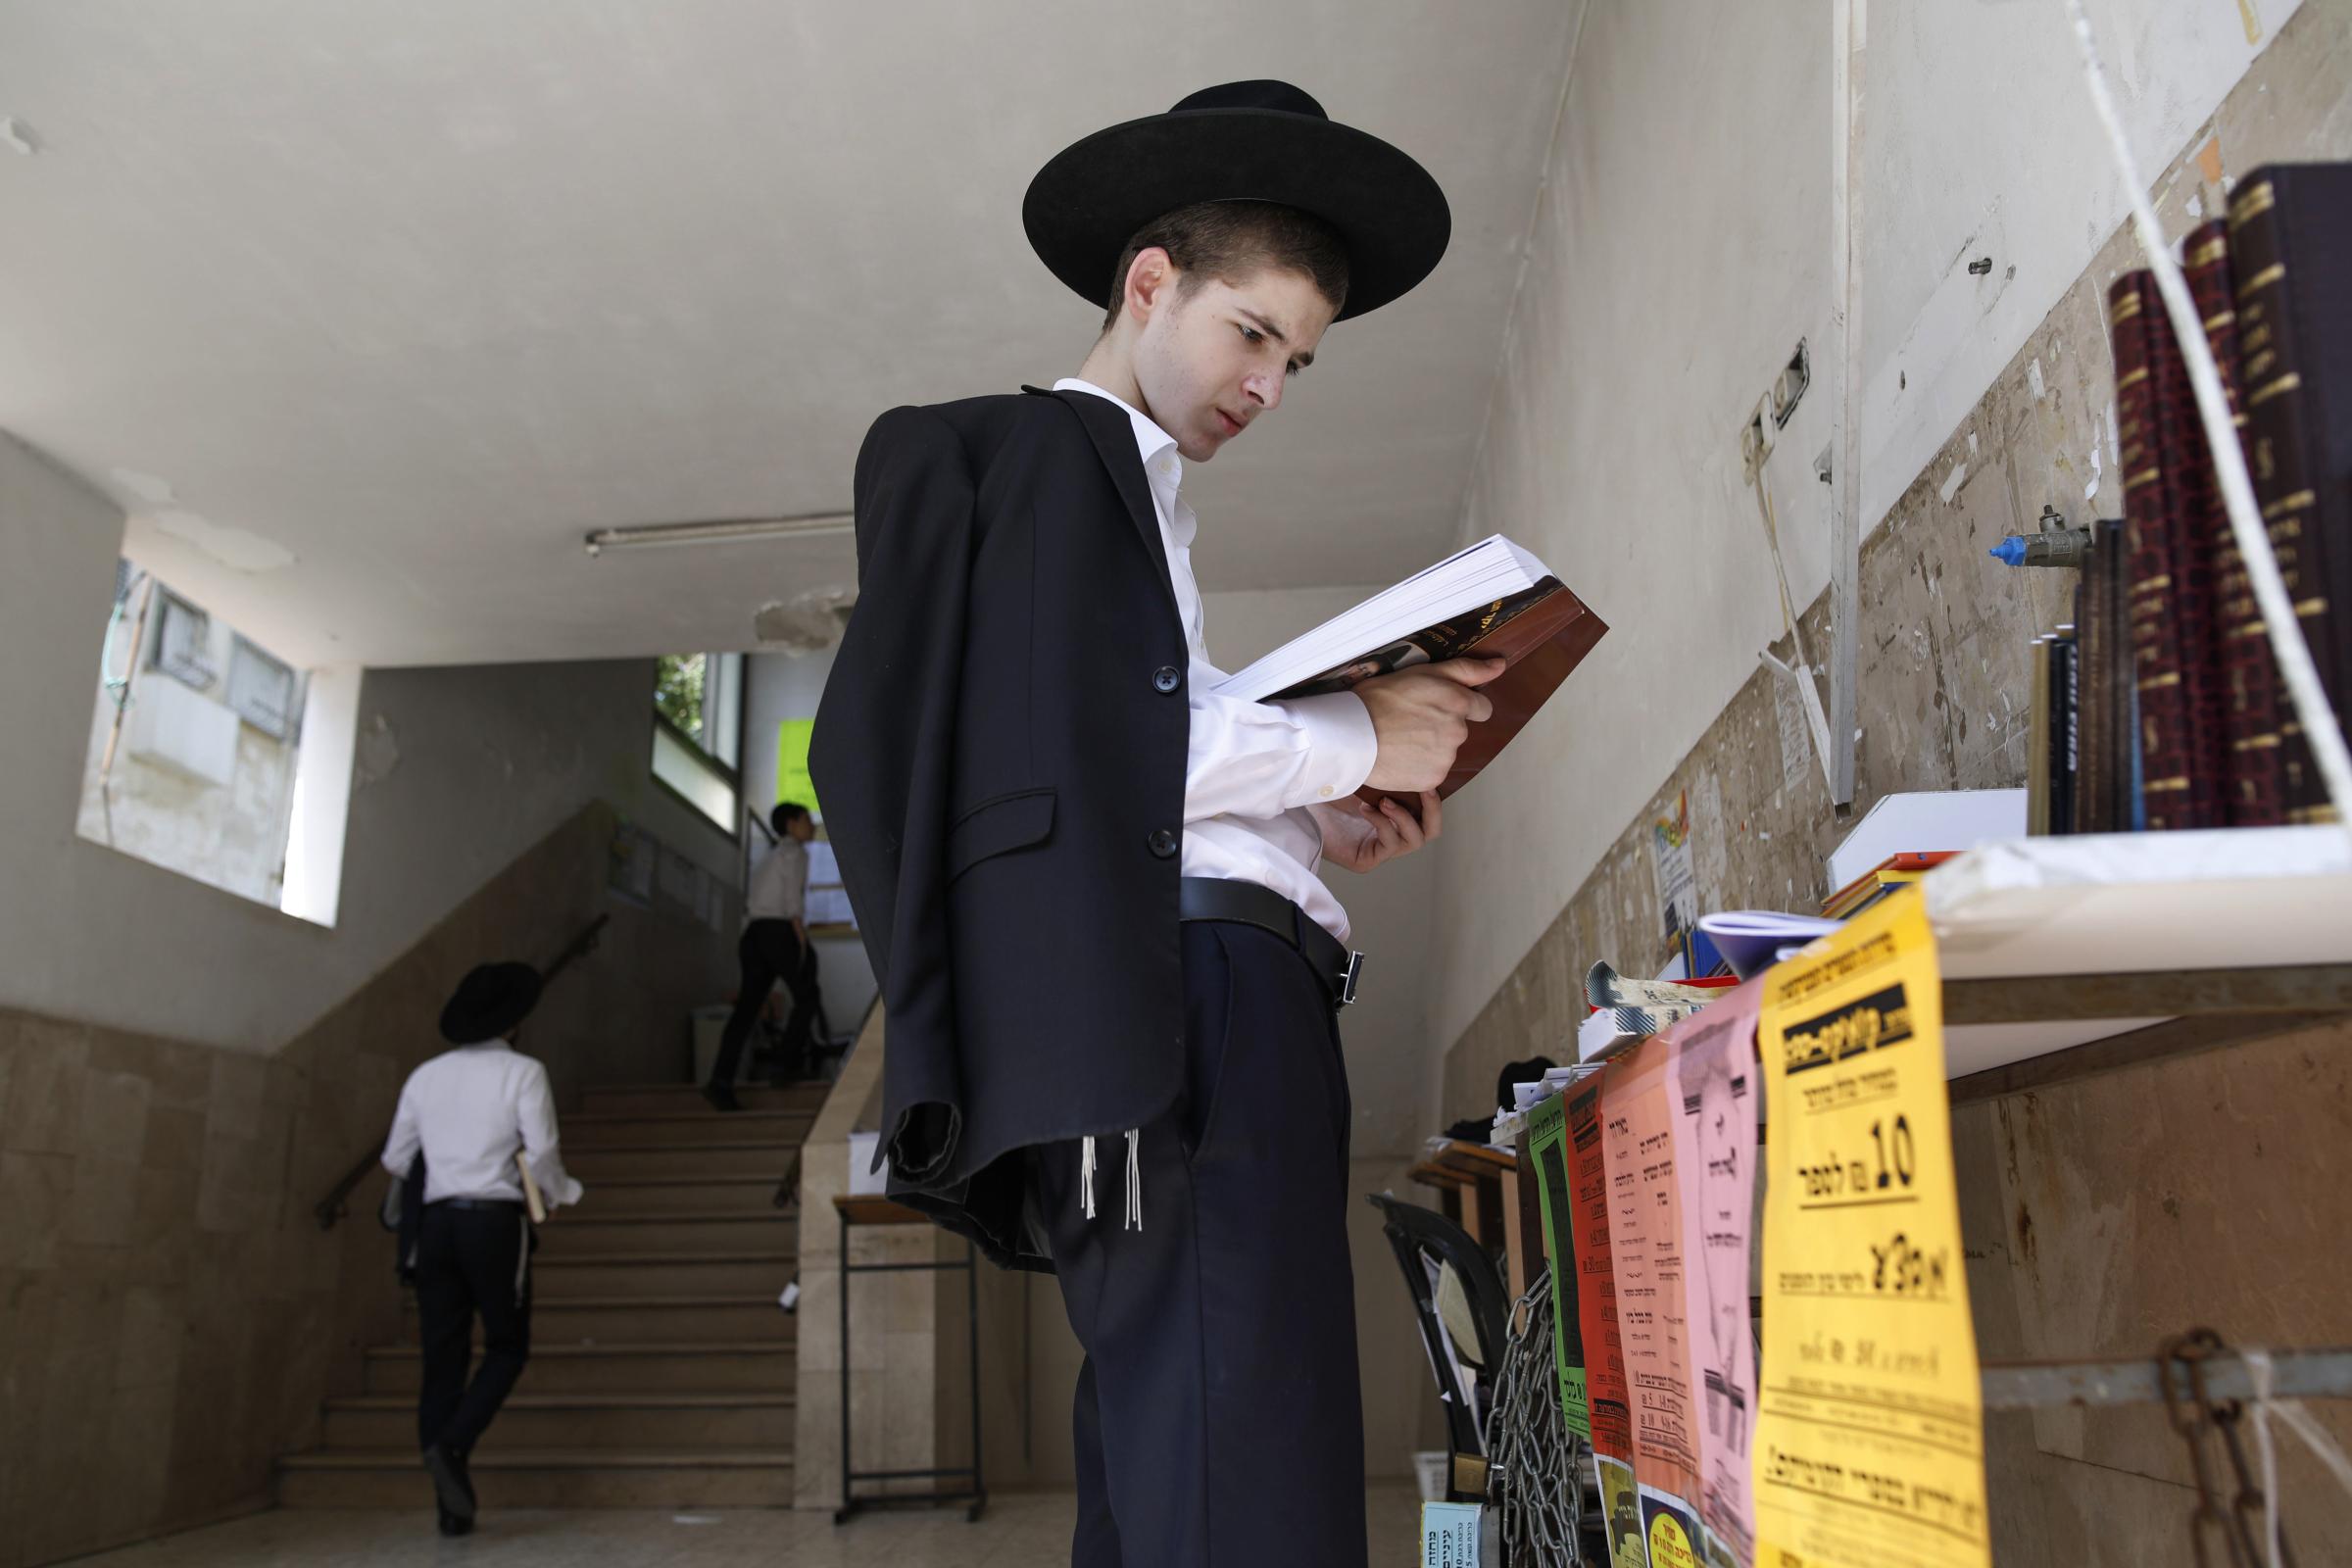 Ultra-Orthodox Community - An ultra-orthodox Jewish man reads a book while standing...